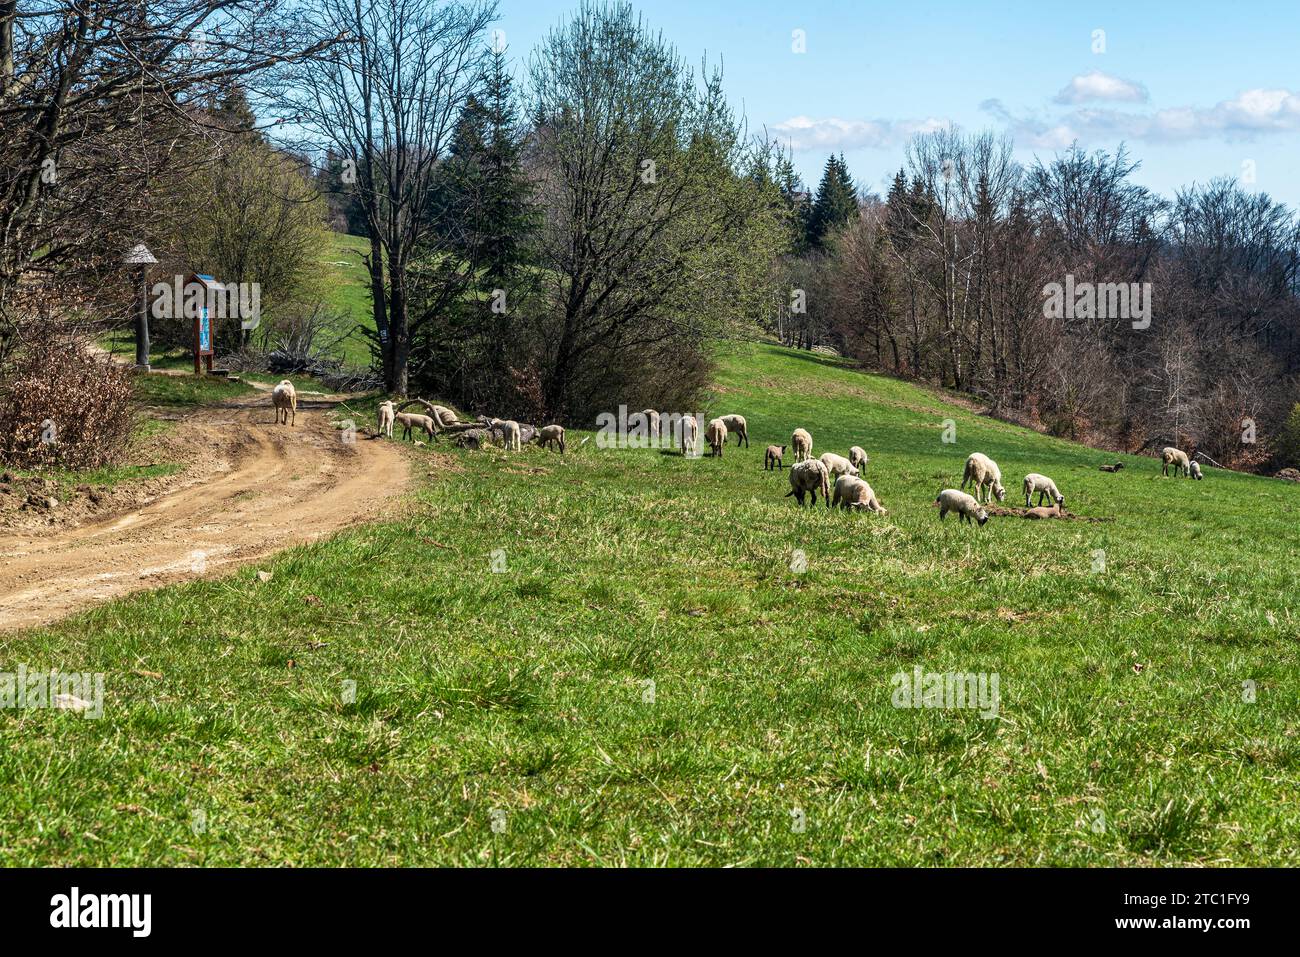 Javorniky mountains in Slovakia with meadow, trees, trail and sheep during springtime Stock Photo